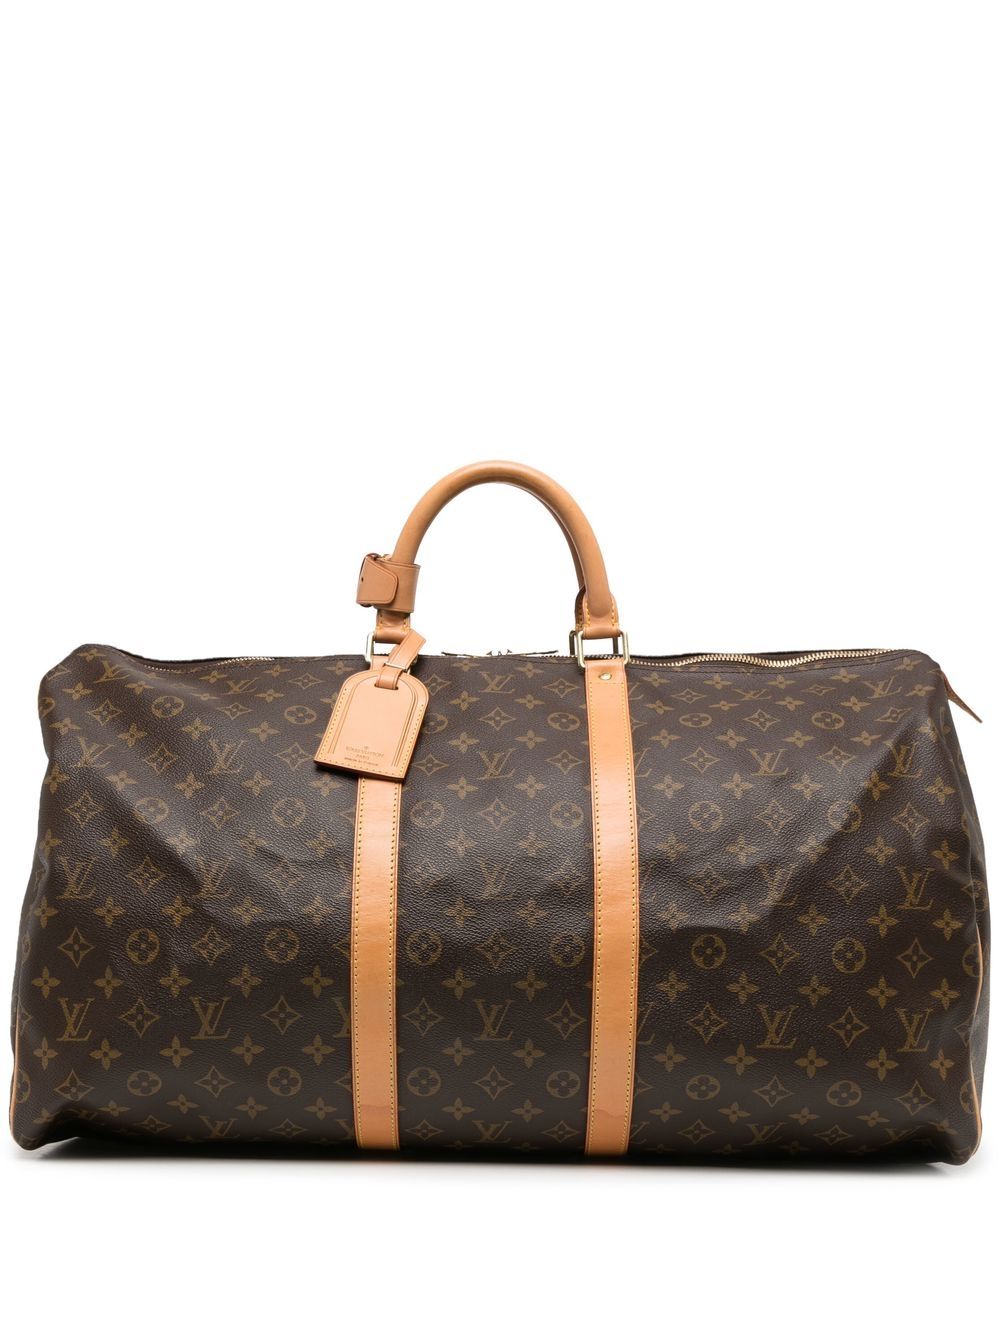 Louis Vuitton 2000s pre-owned Keepall 55 Travel Bag - Farfetch